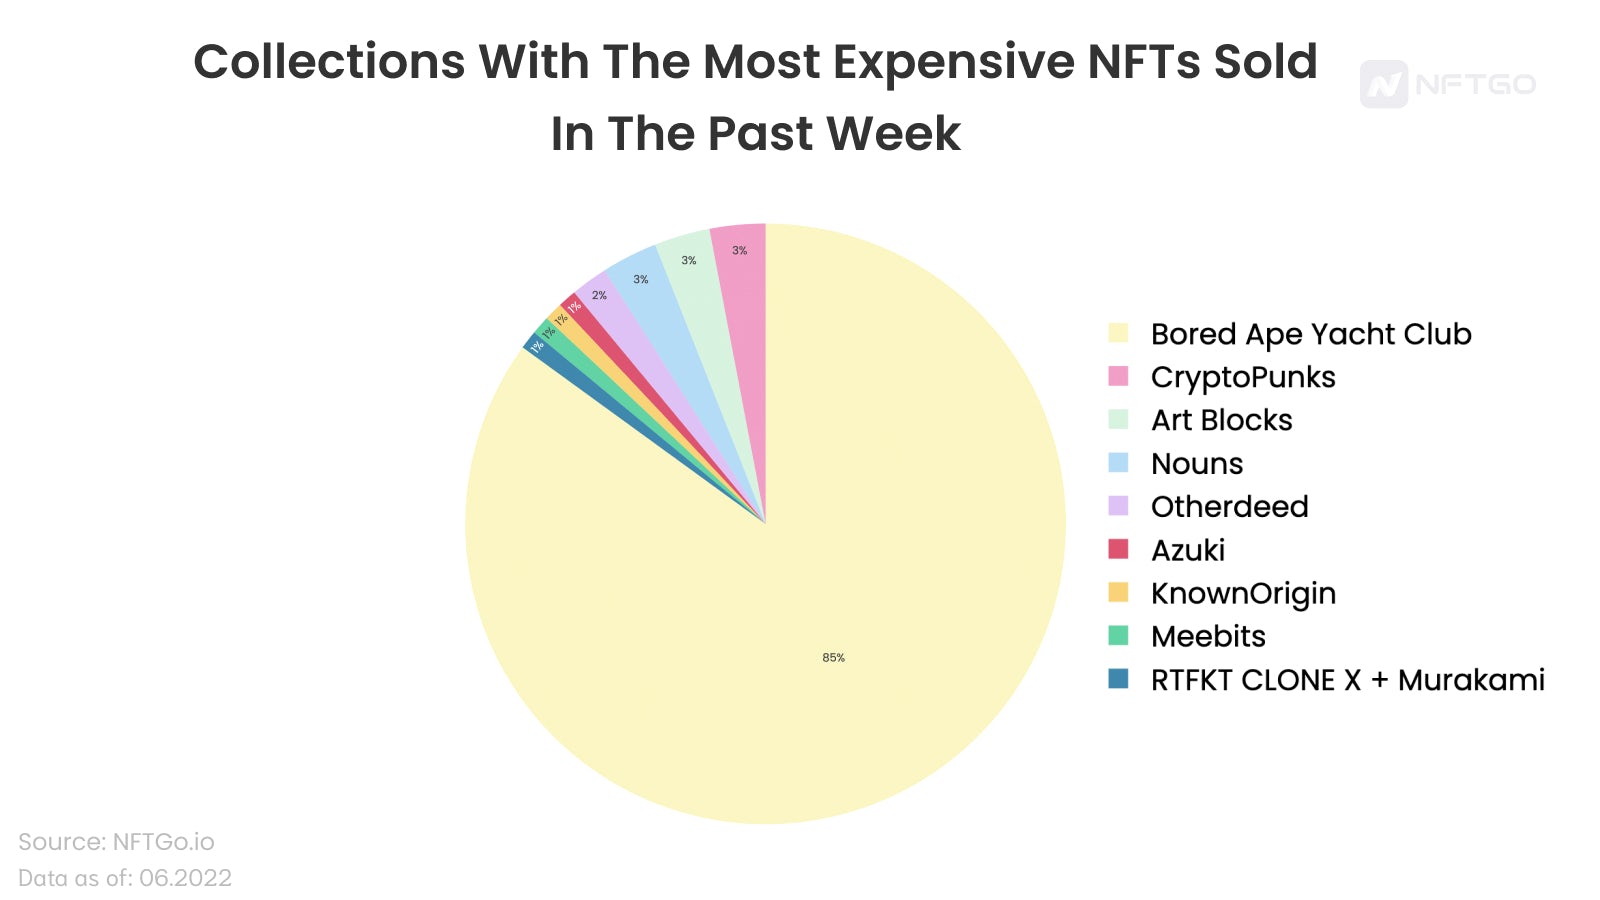 Collections With the Most Expensive NFTs Sold In the Past Week